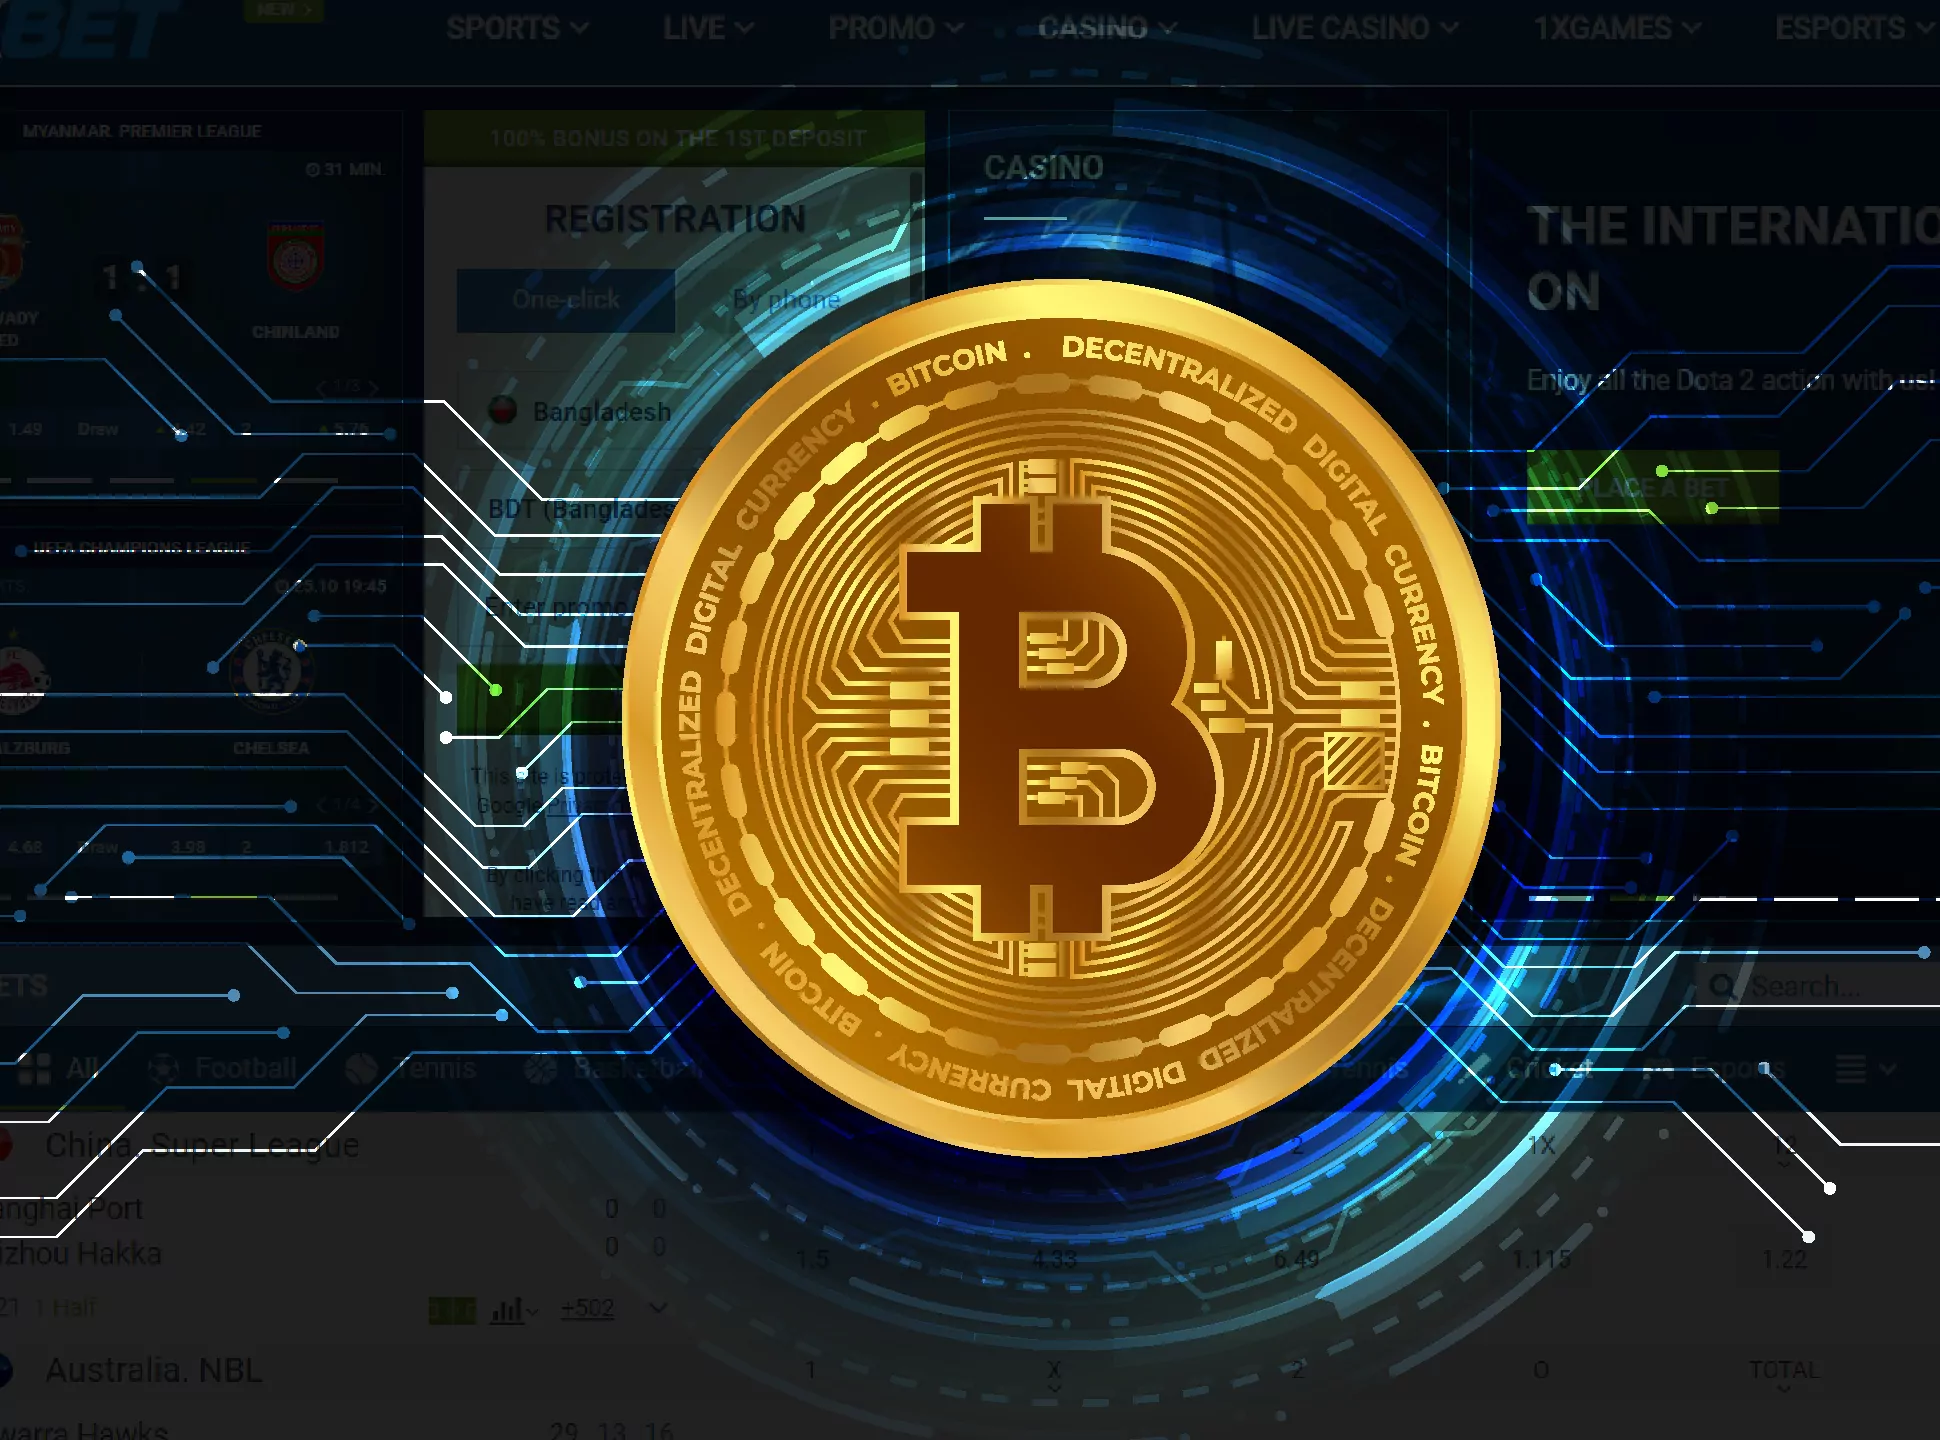 Many modern online casinos allow depositing and withdrawing money with cryptocurrency.